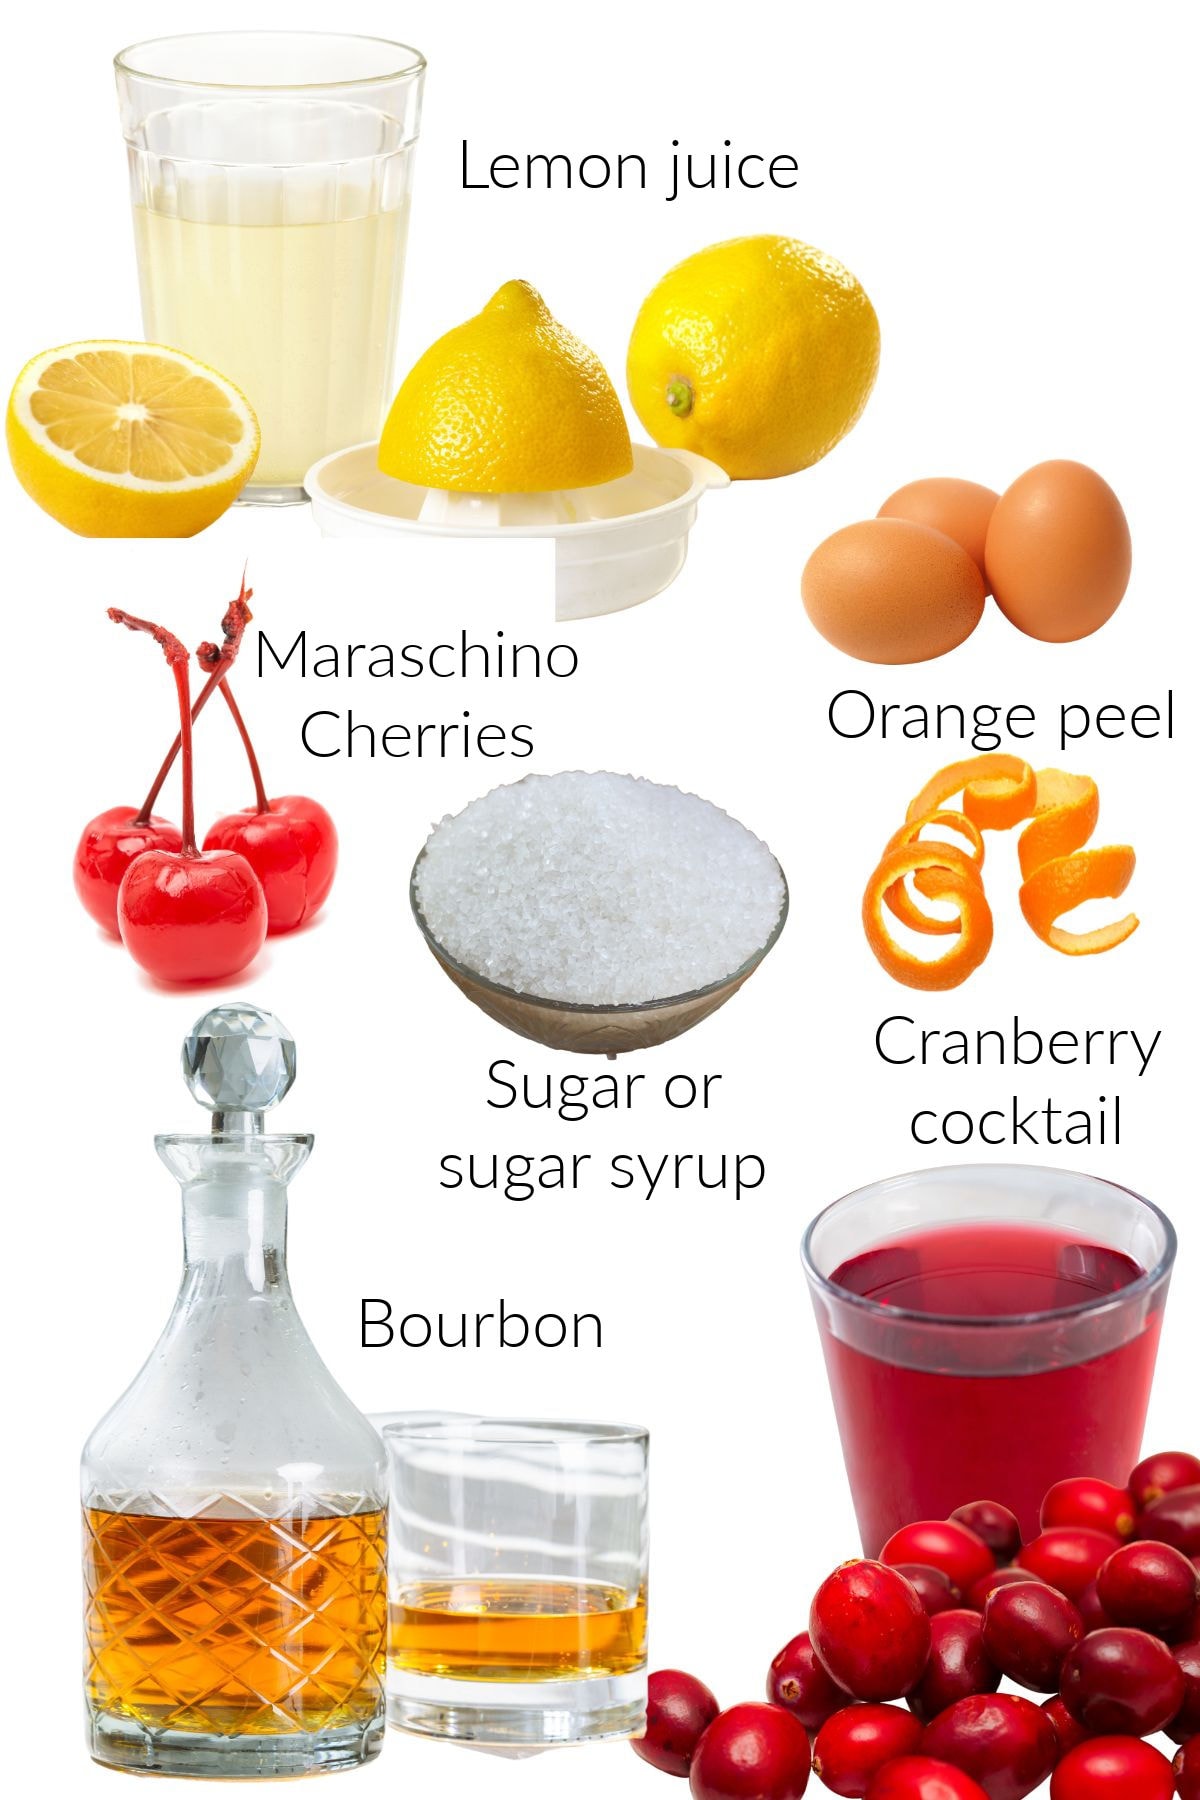 Labeled ingredients for this cocktail on a white background.